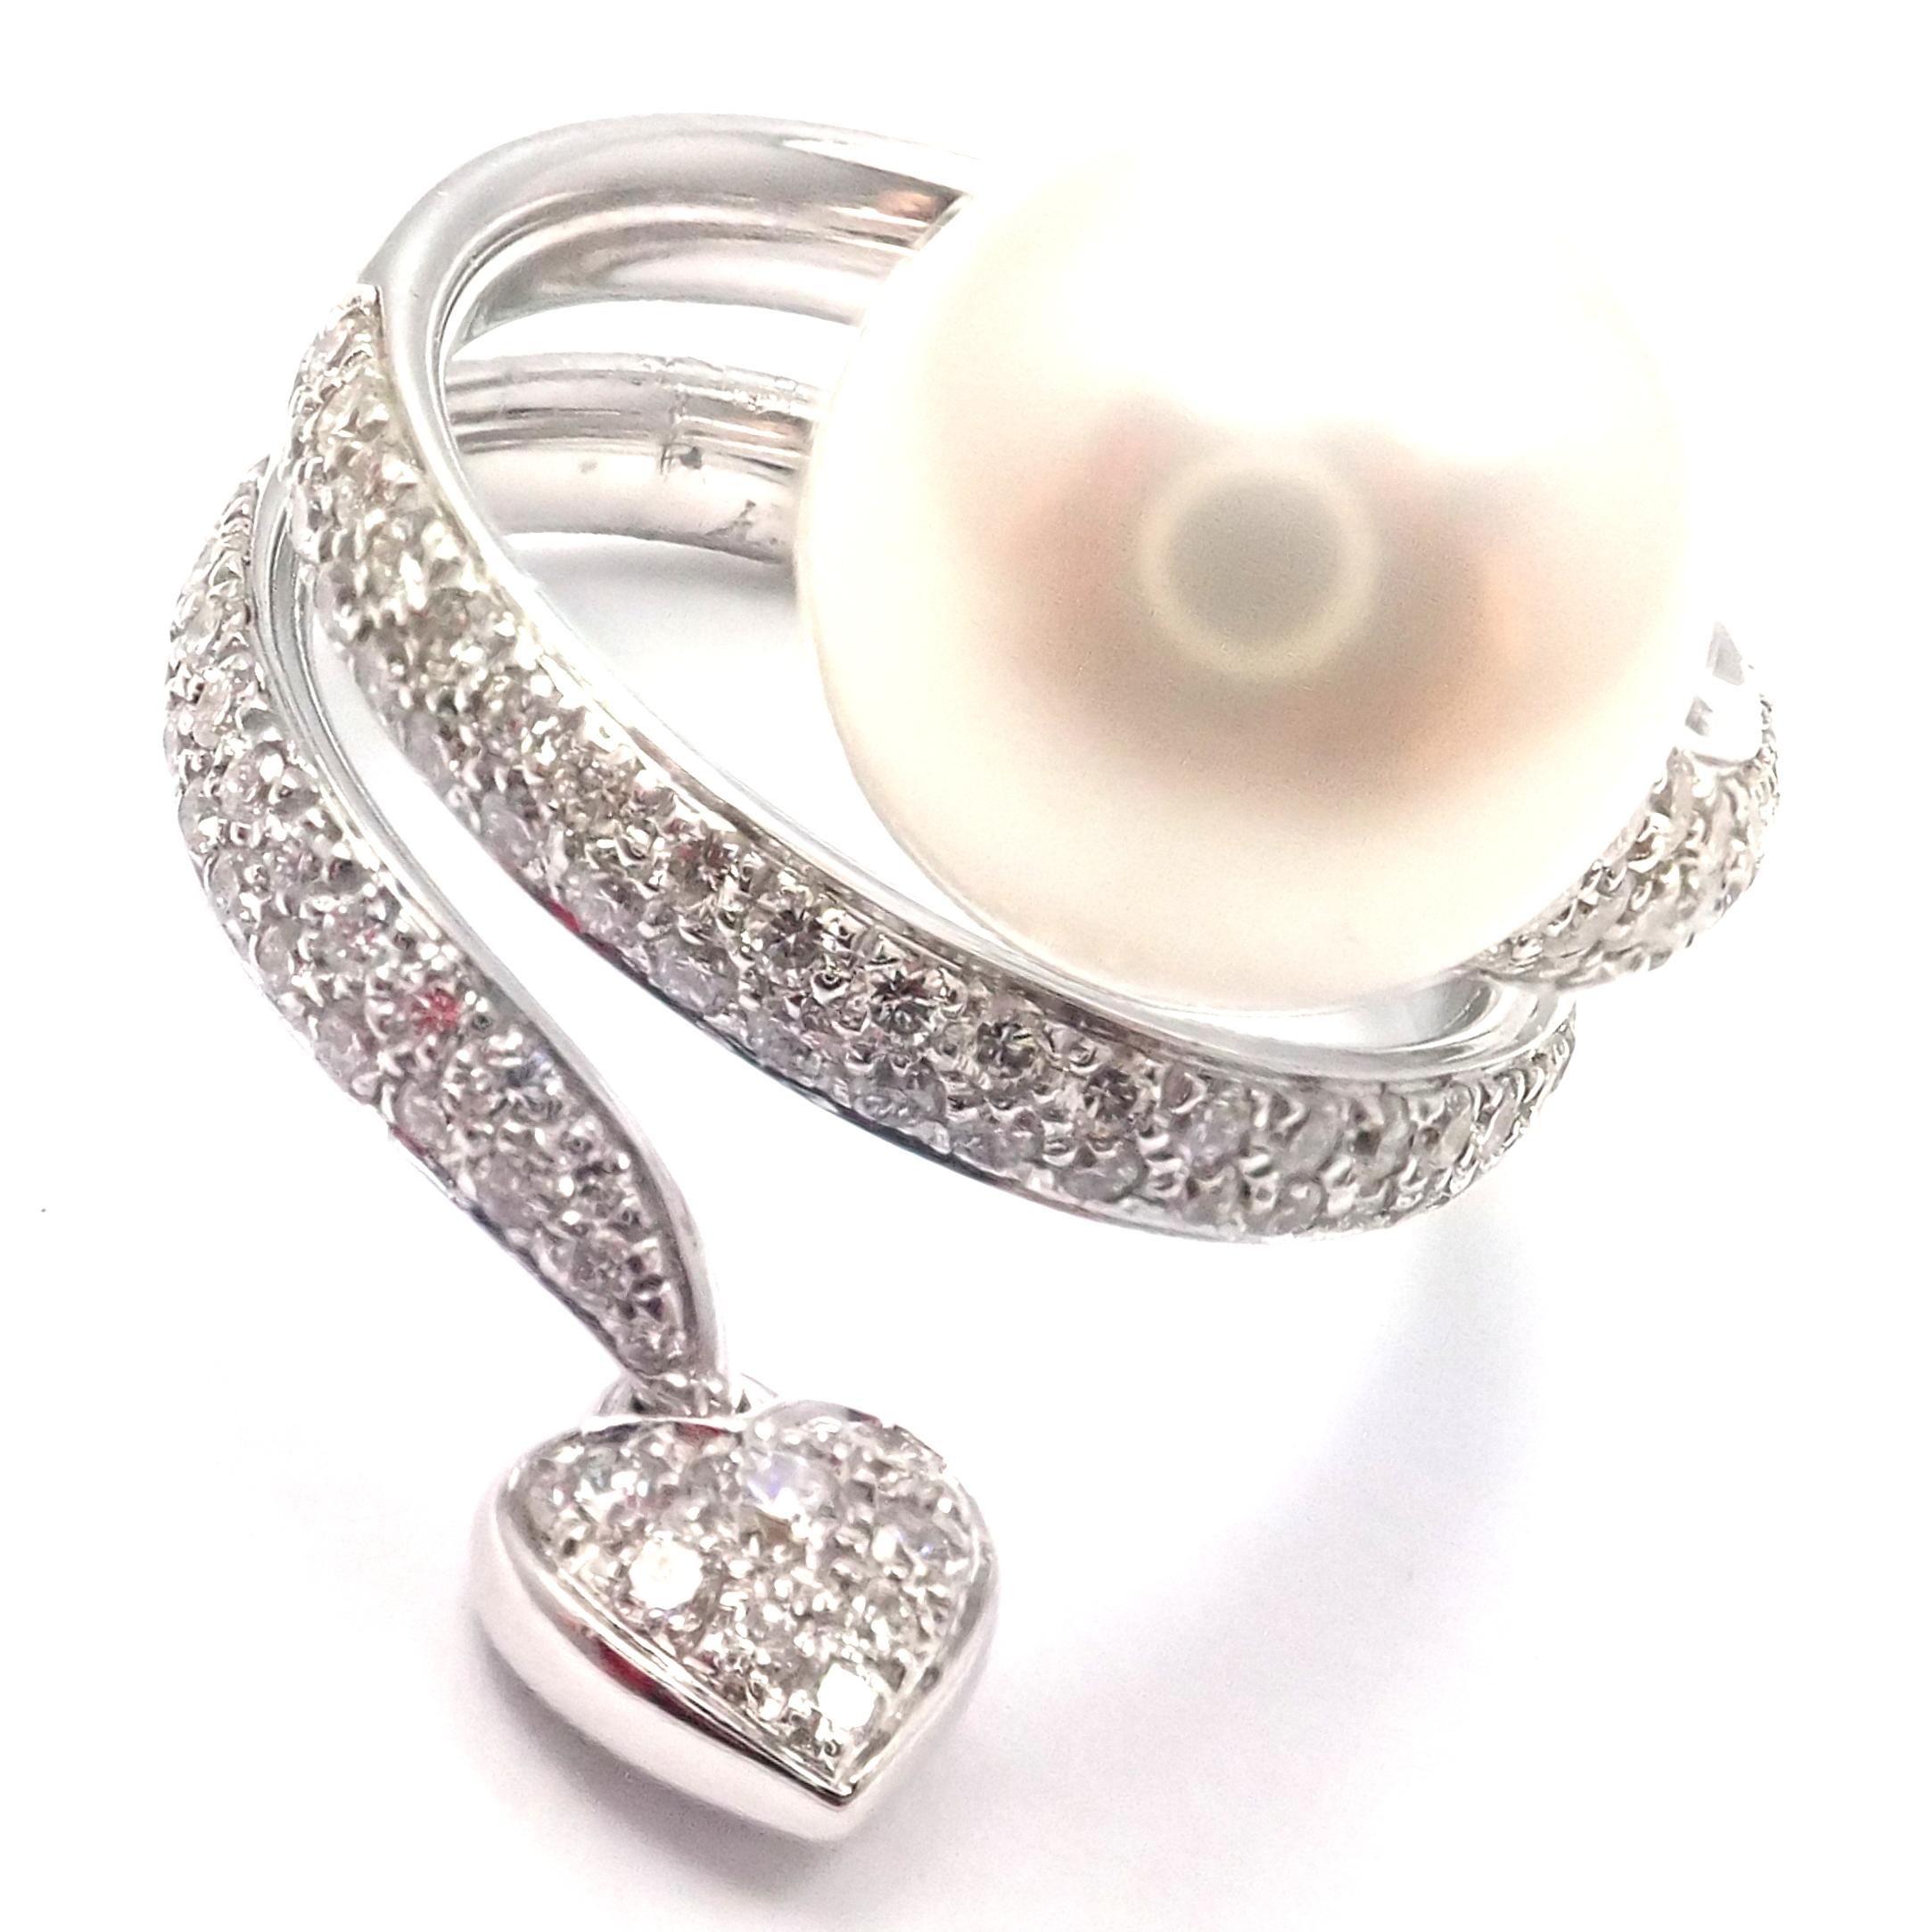 18k White Gold Diamond Large South Sea Pearl Ring by Mikimoto. 
With Round brilliant cut VS1 clarity, E color diamonds total weight approx. .90ct
1 x 10mm South Sea Pearl 
Color White
Quality Grade A+
This ring comes with Certificate for Retail